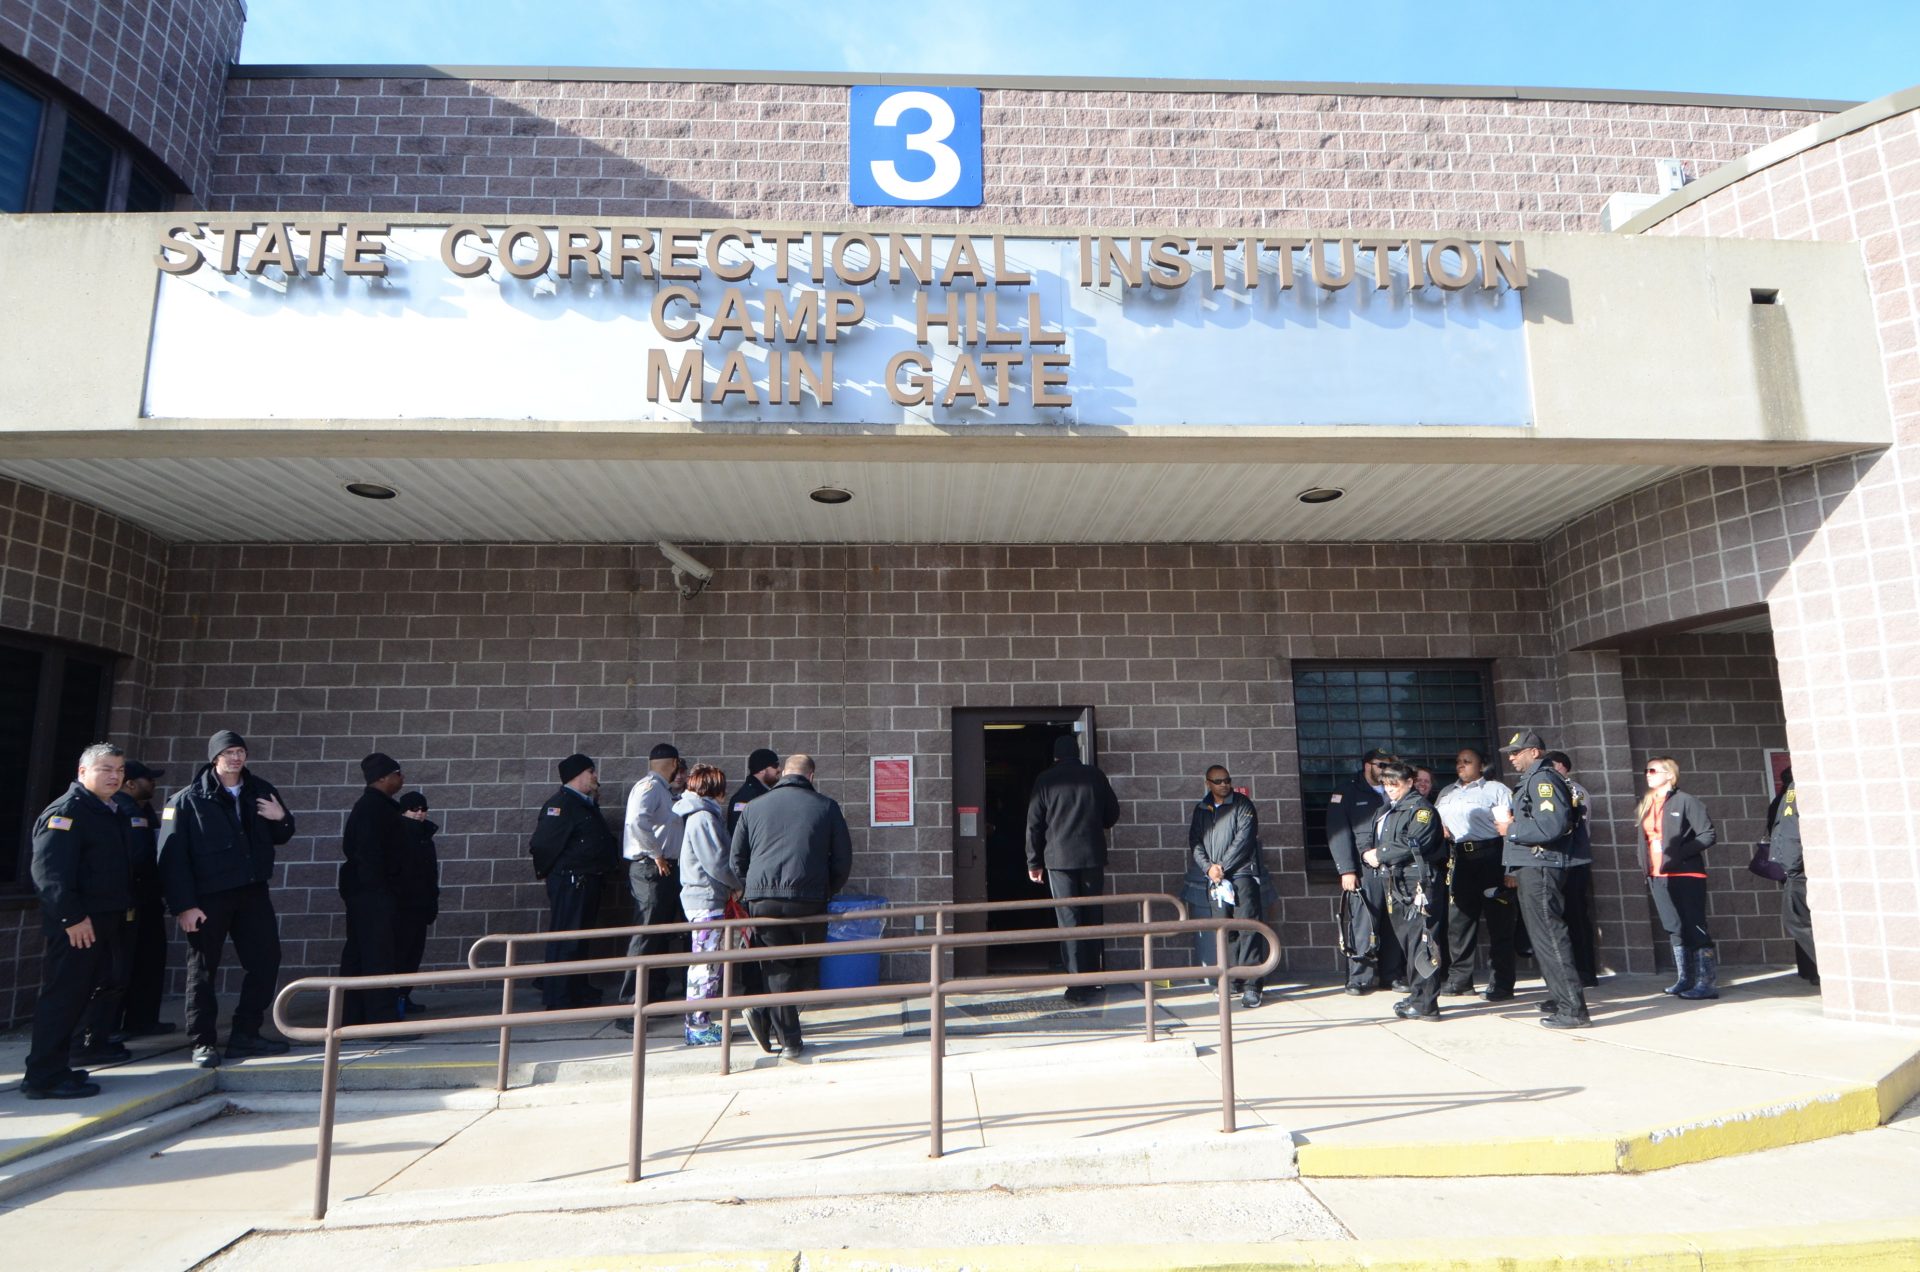 FILE PHOTO: Corrections officers arrive for their shift at the State Correctional Institution at Camp Hill on Jan. 13, 2017, in Camp Hill, Pa.